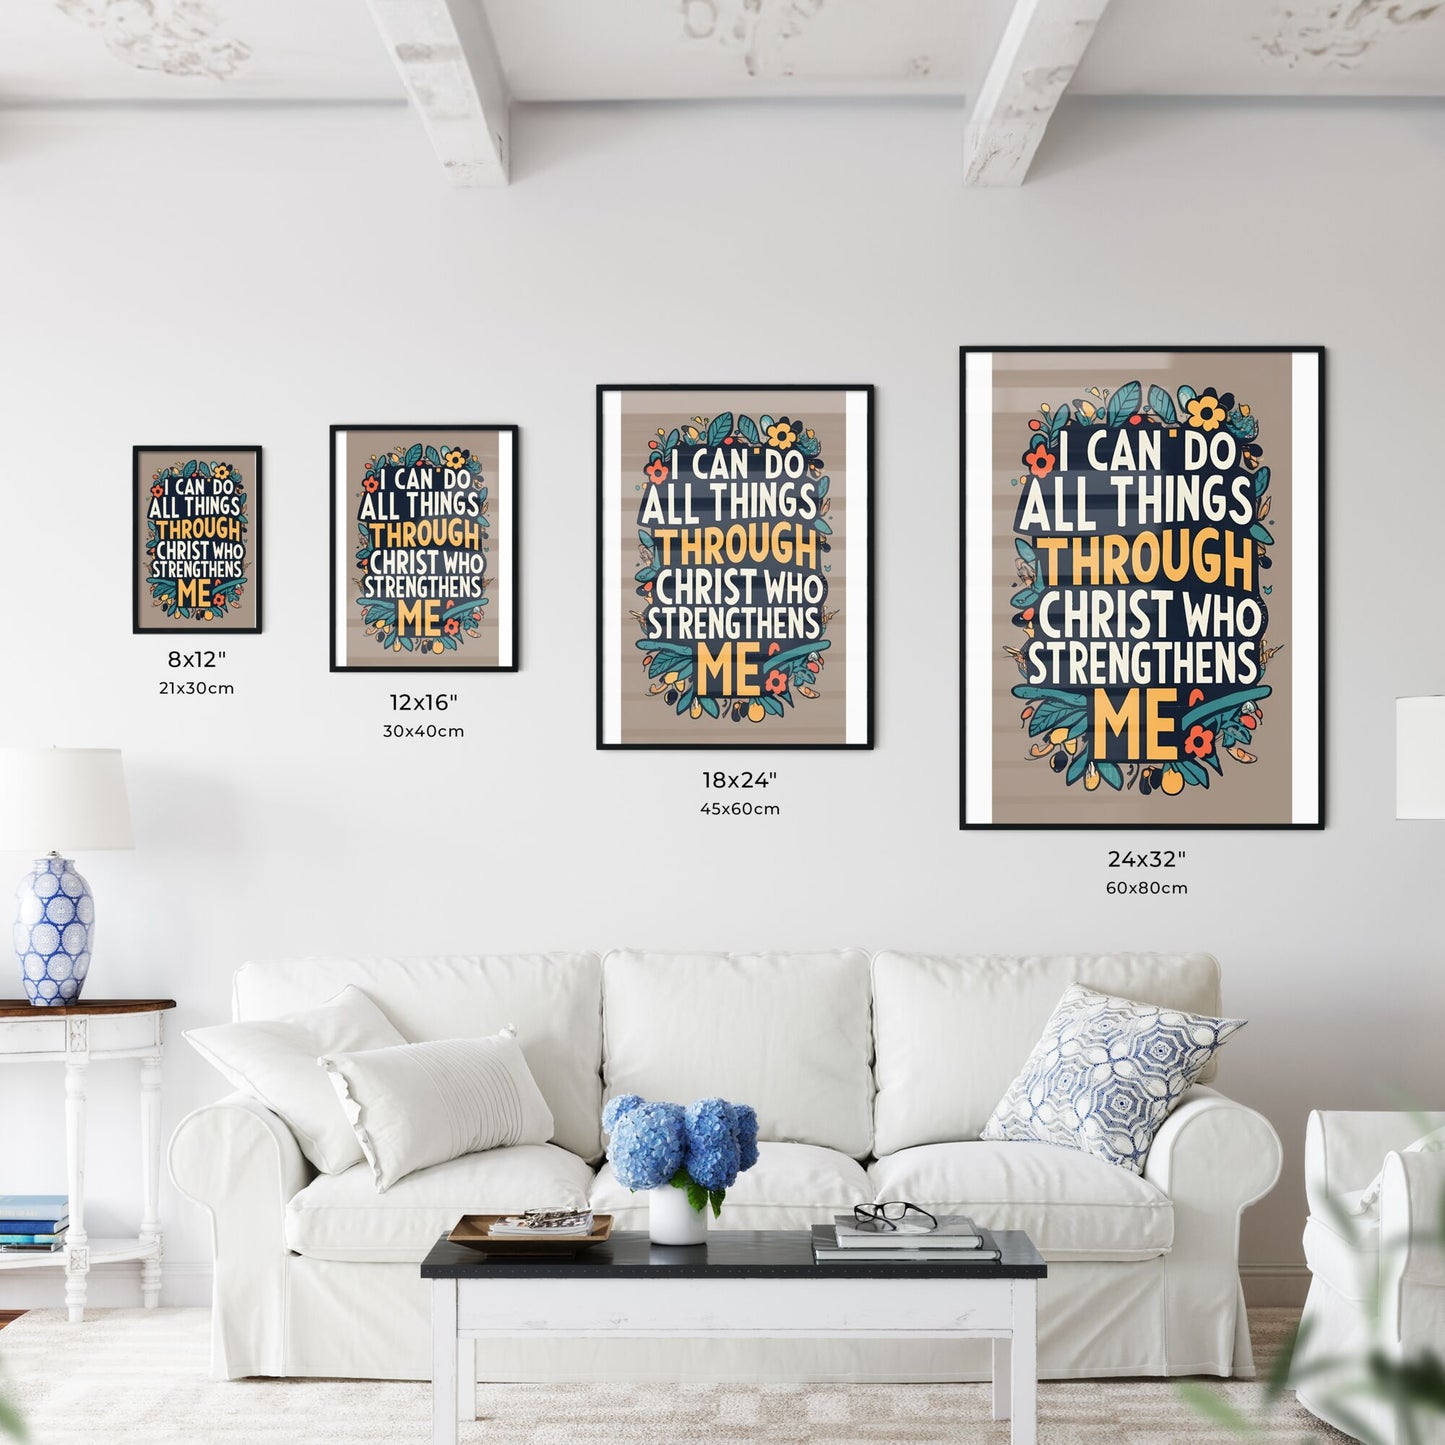 I Can Do All Things Through Christ Who Strengthens Me - A Poster With Text On It Art Print Default Title